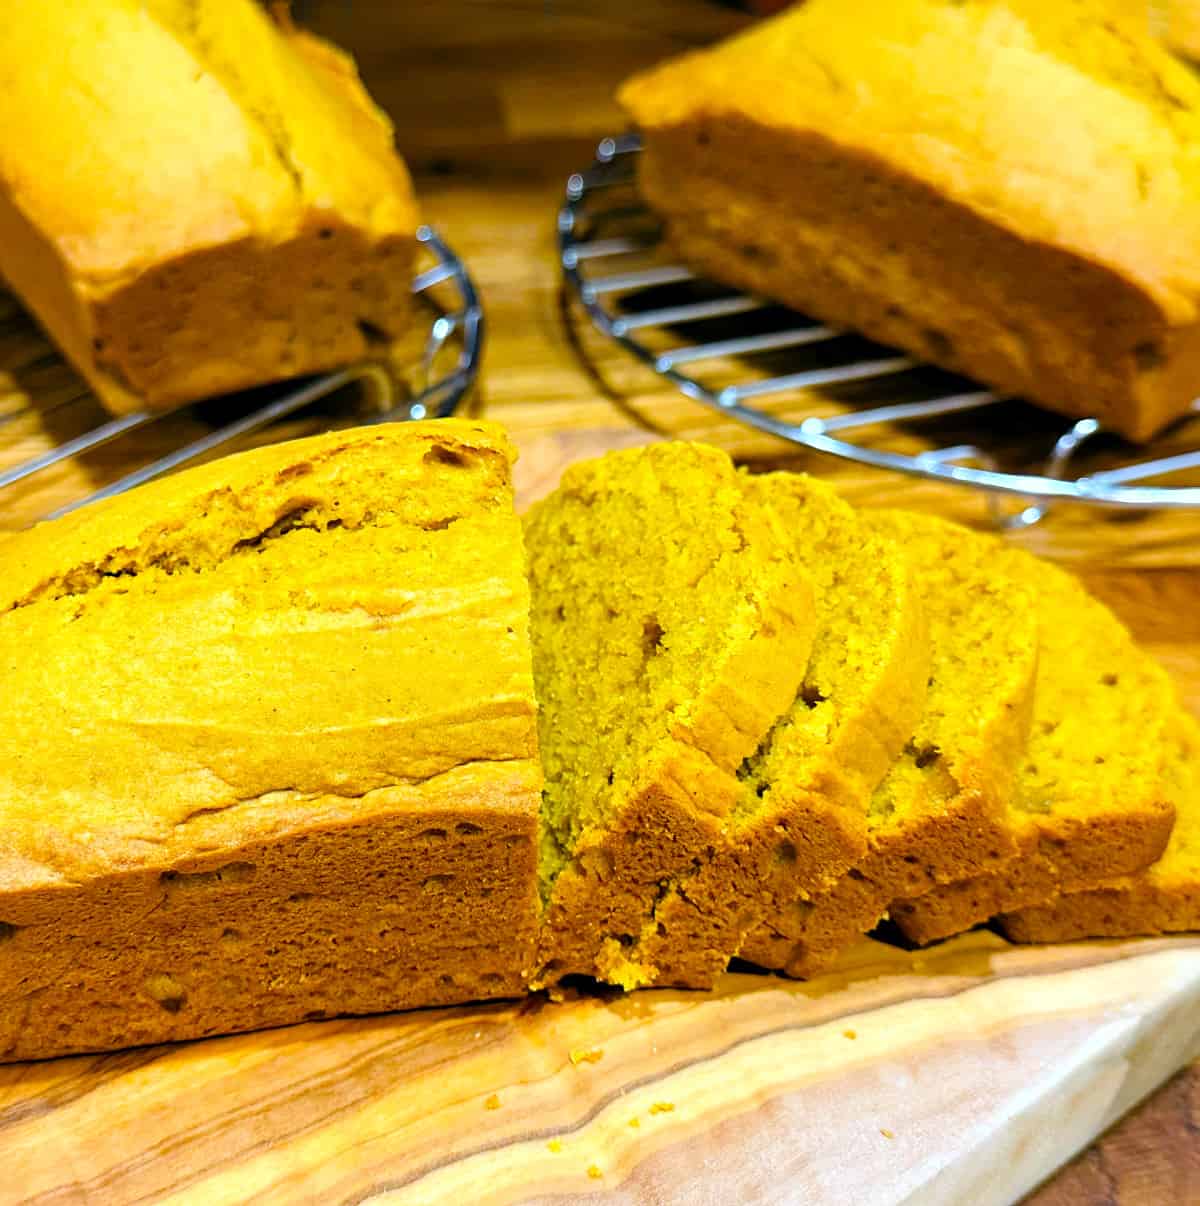 Partially sliced loaf of pumpkin bread on a wooden cutting board in front of two loaves each cooling on round wire racks.